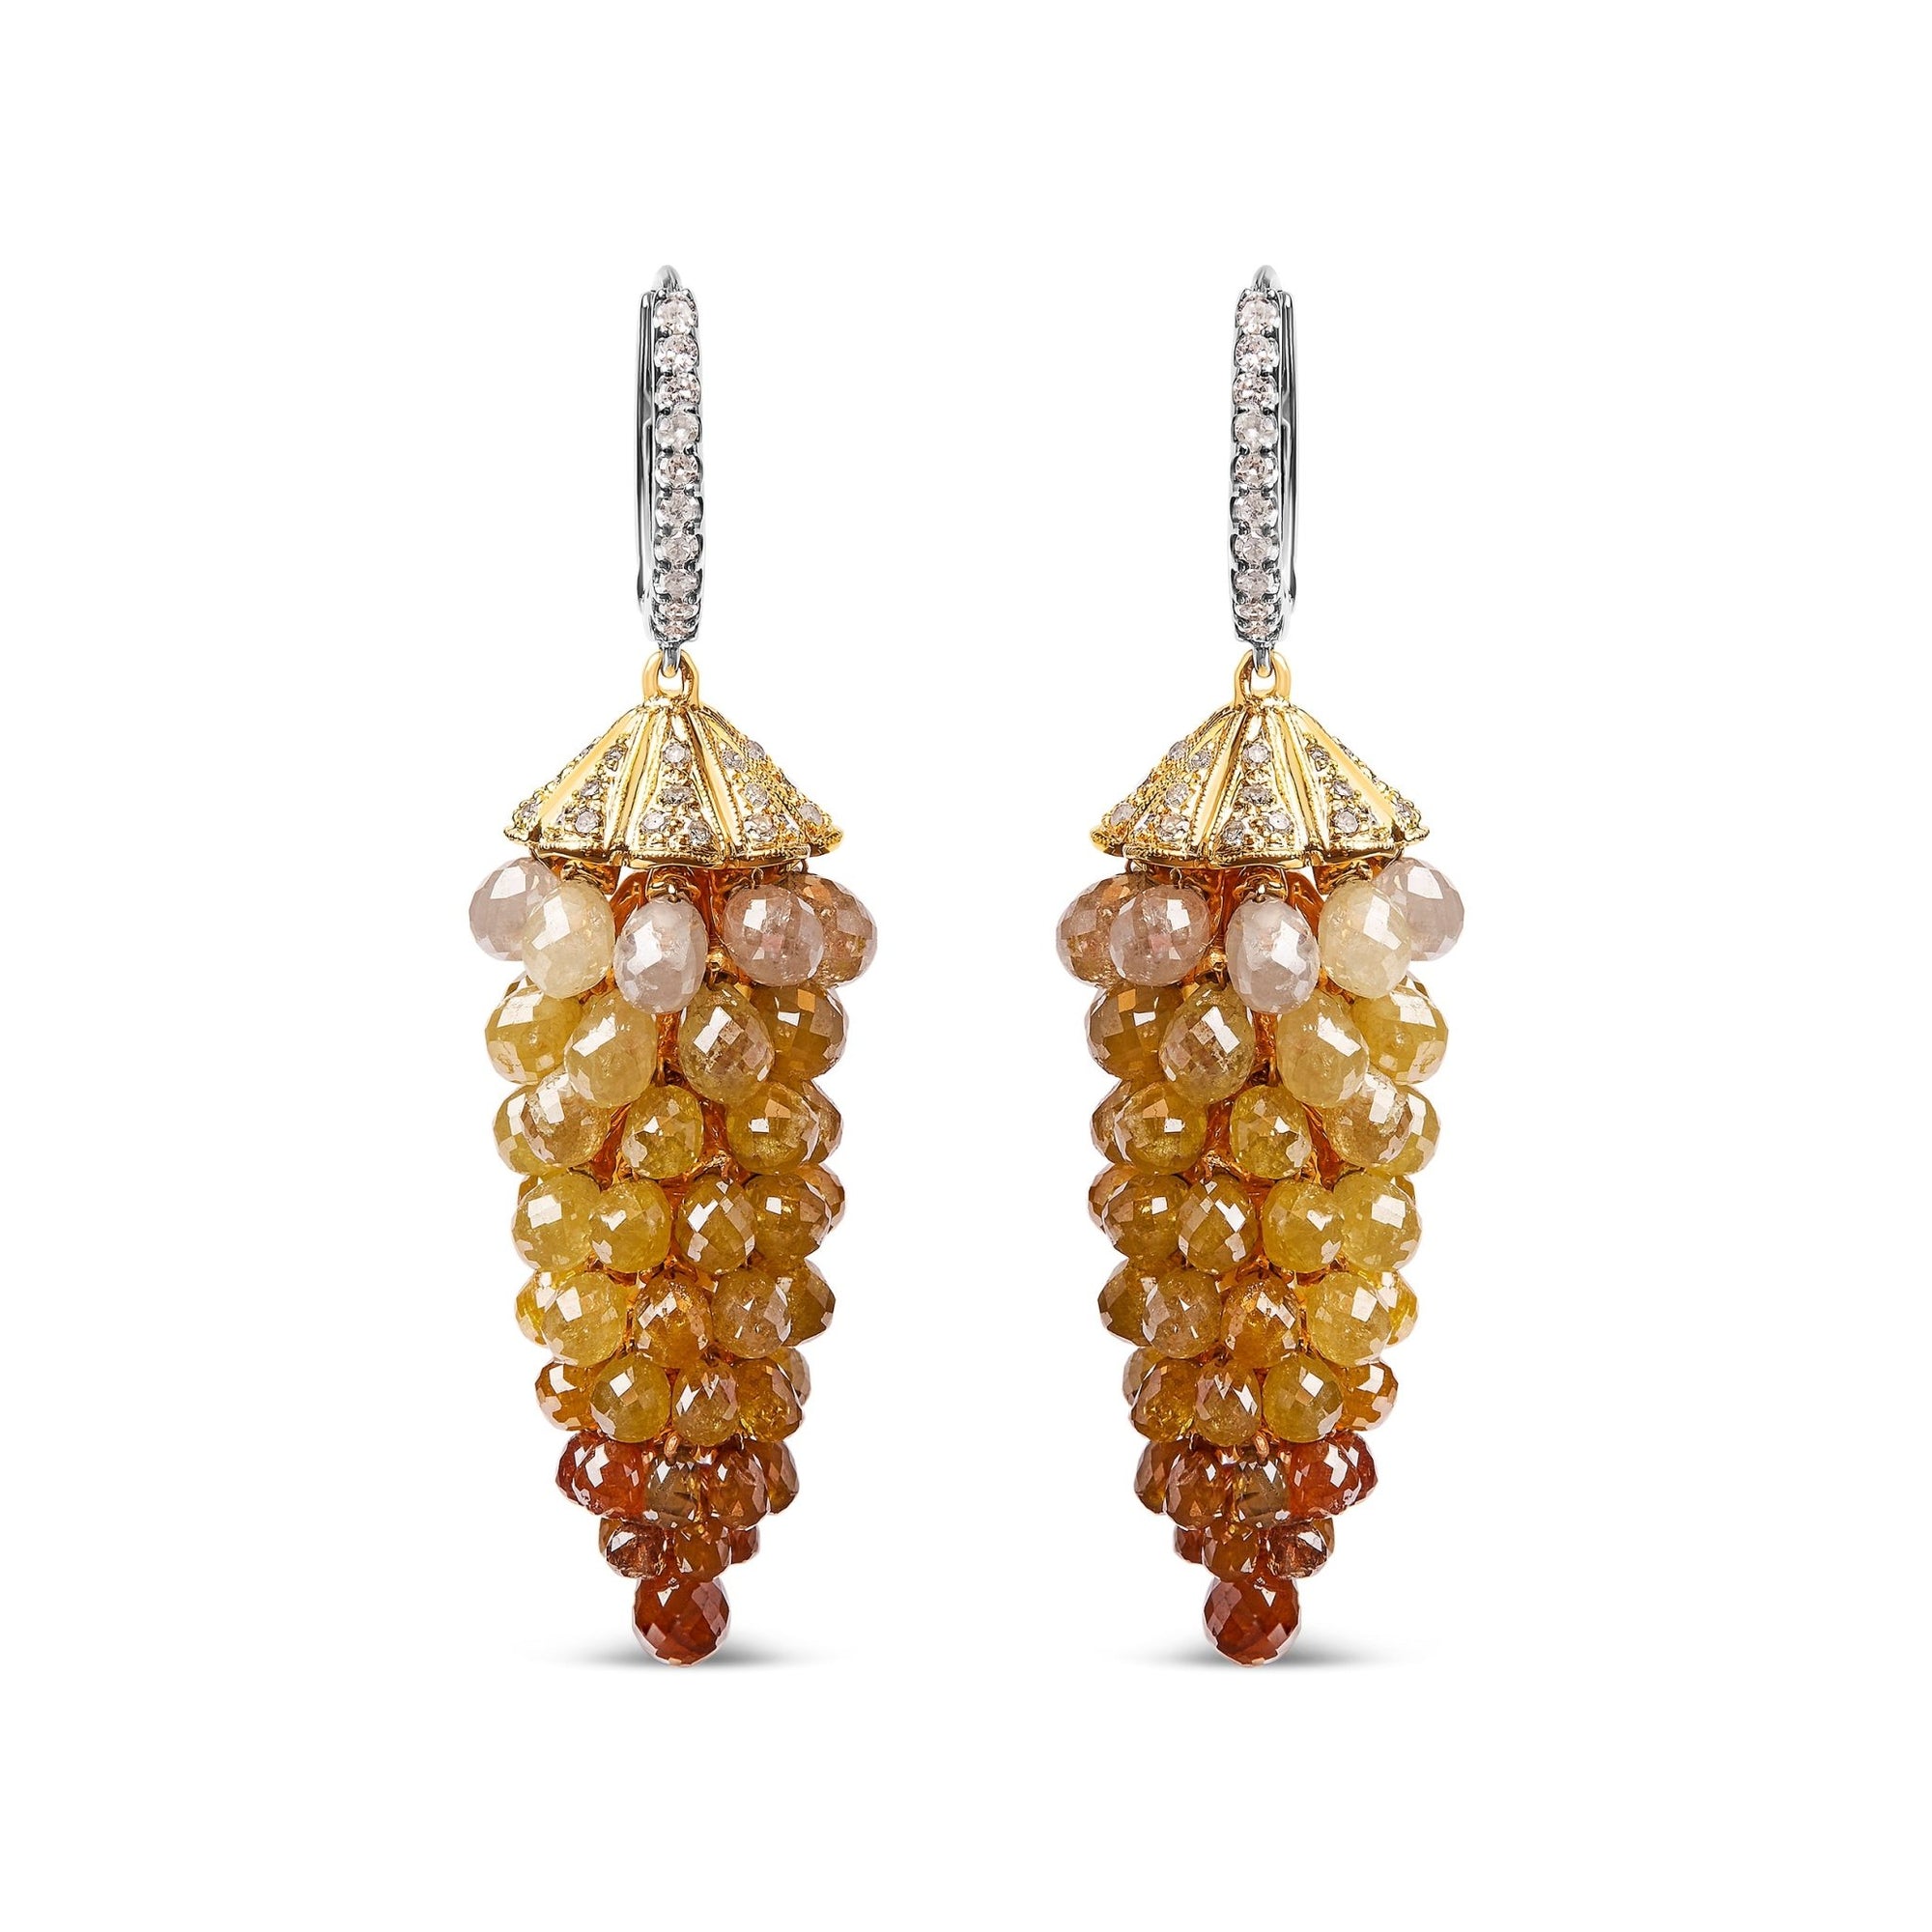 14K White and Yellow Gold 38.0 Cttw Mixed Fancy Color Rose Cut Diamond Honeycomb Drop and Dangle Earring (H-I Color, SI1-SI2 Clarity) - LinkagejewelrydesignLinkagejewelrydesign